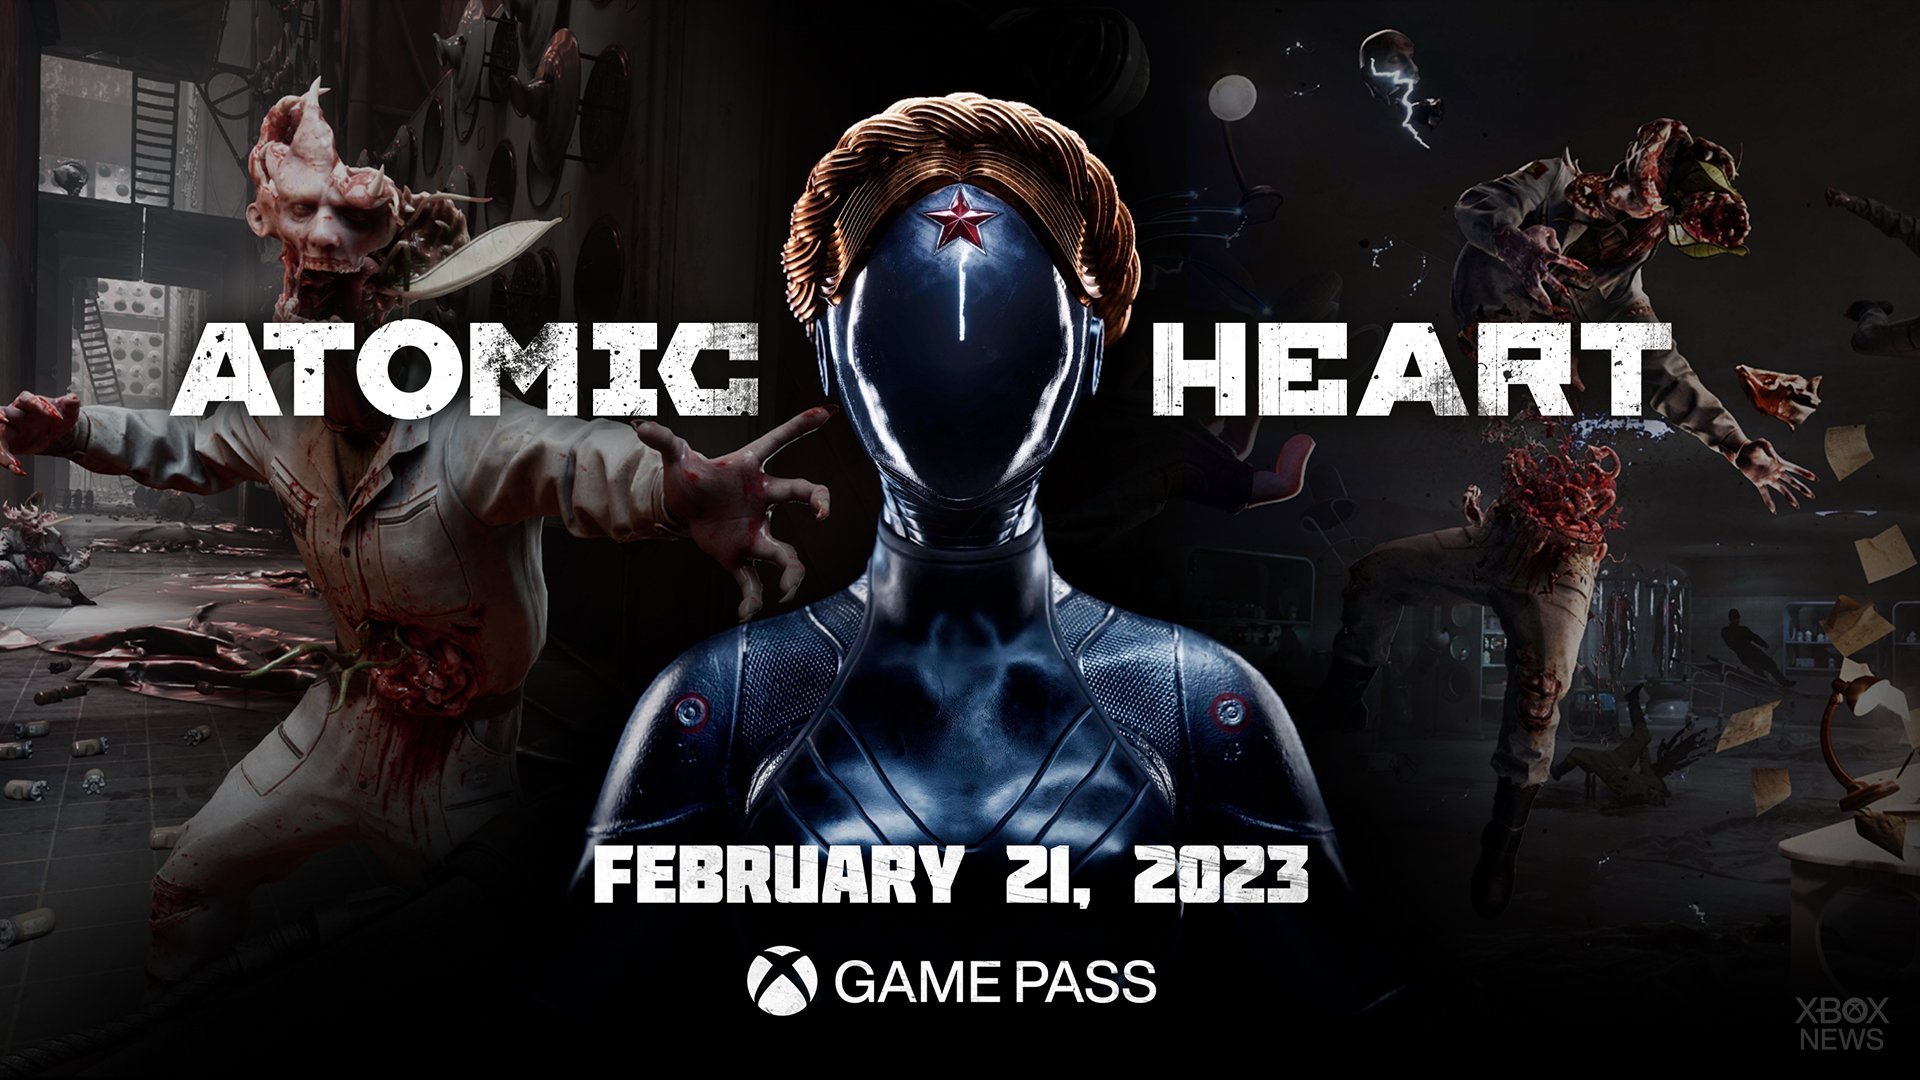 Xbox News Heart officially releases February 2023. Day one with Xbox Game Pass